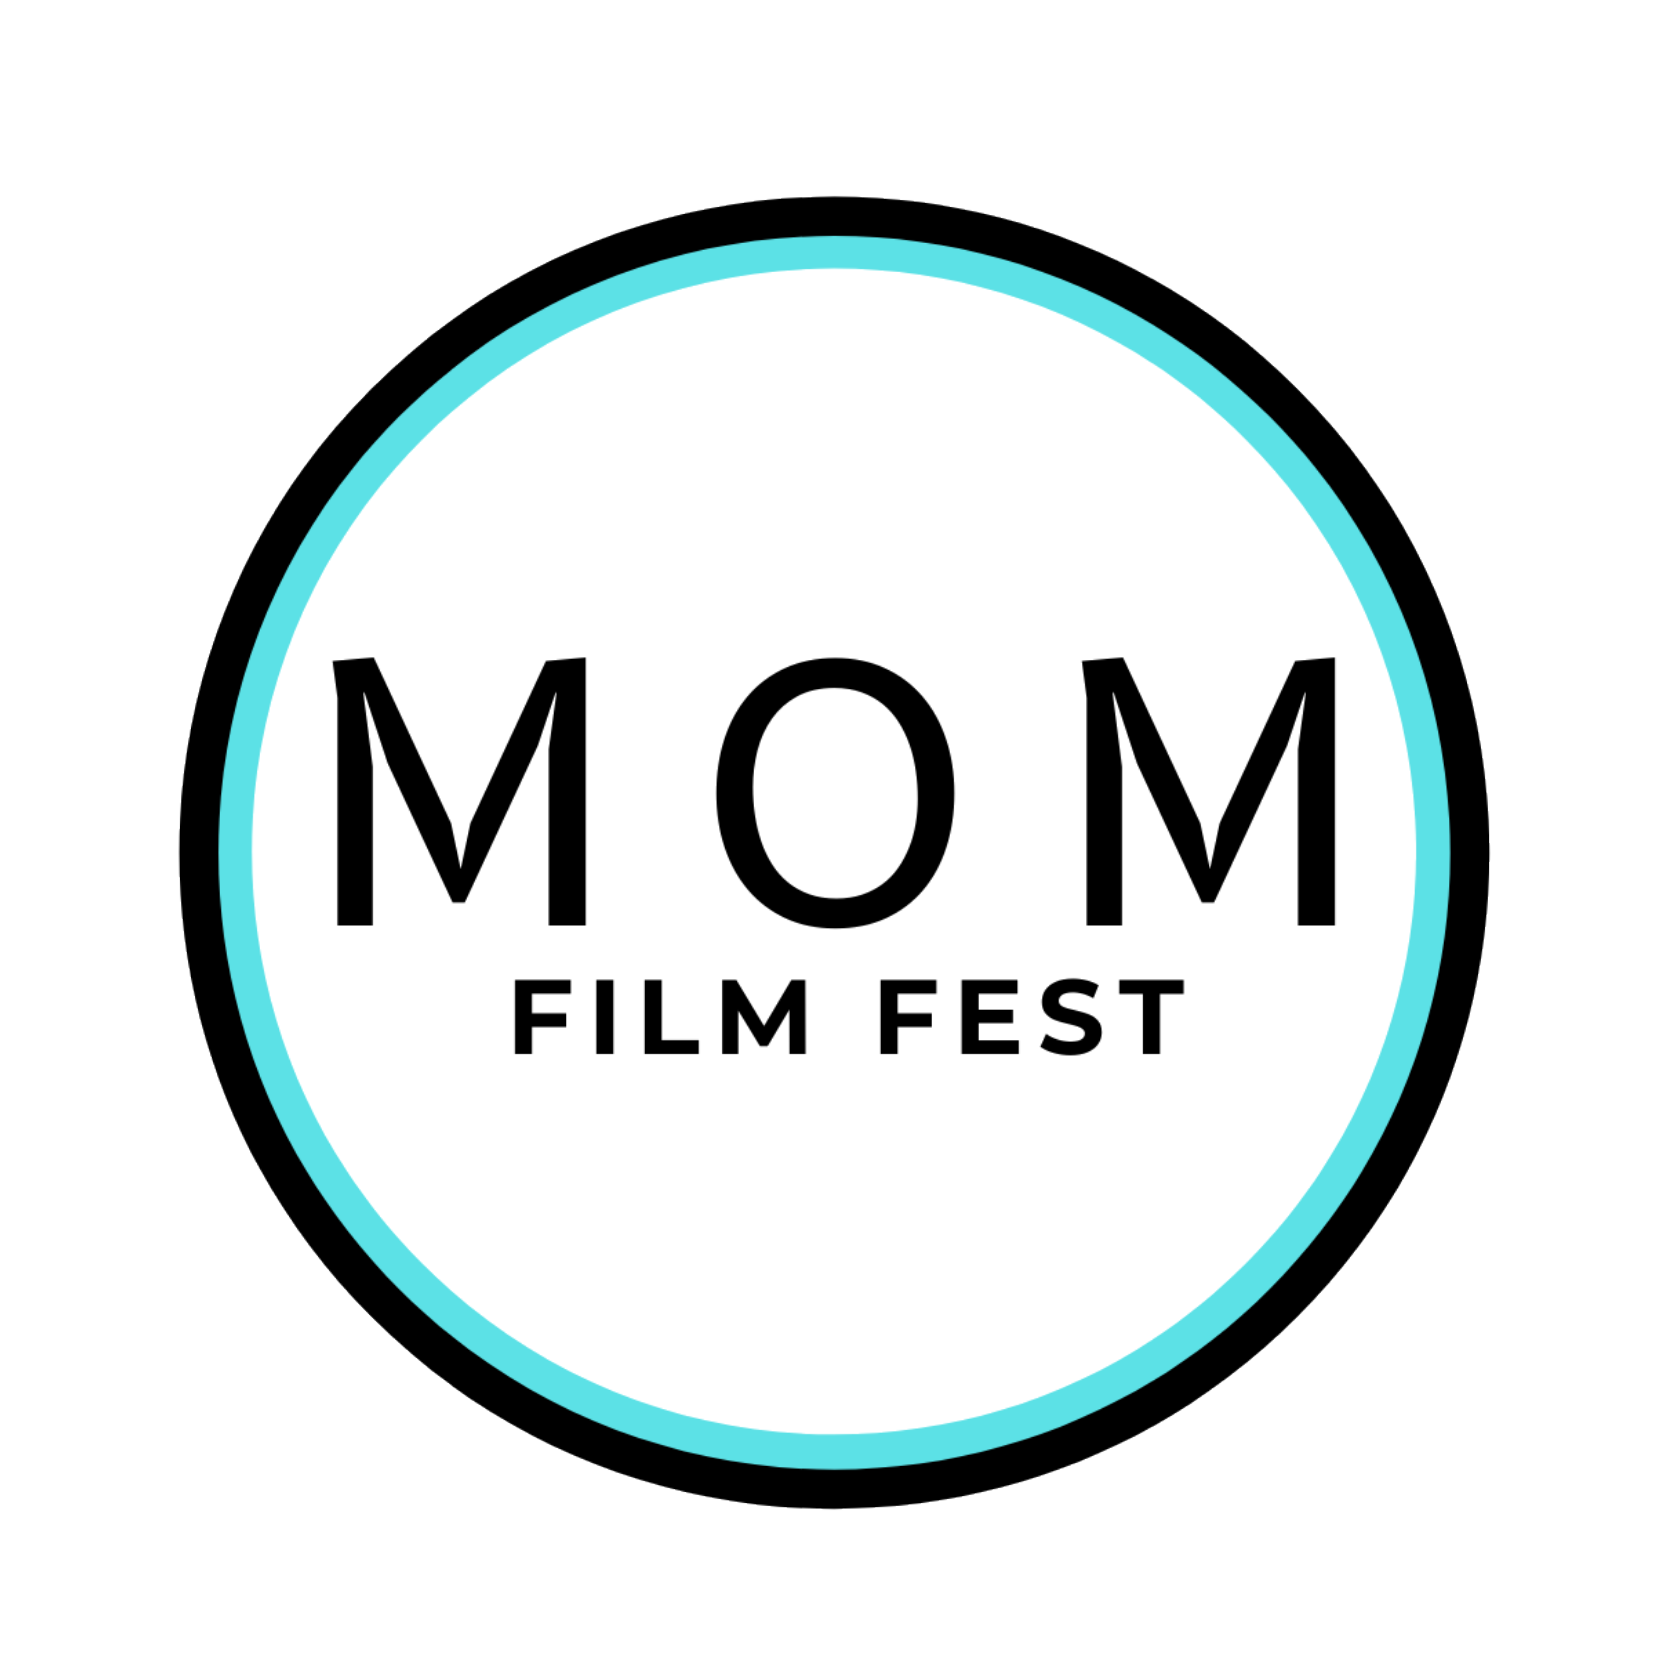 Welcome to MOM Film Fest Online Events